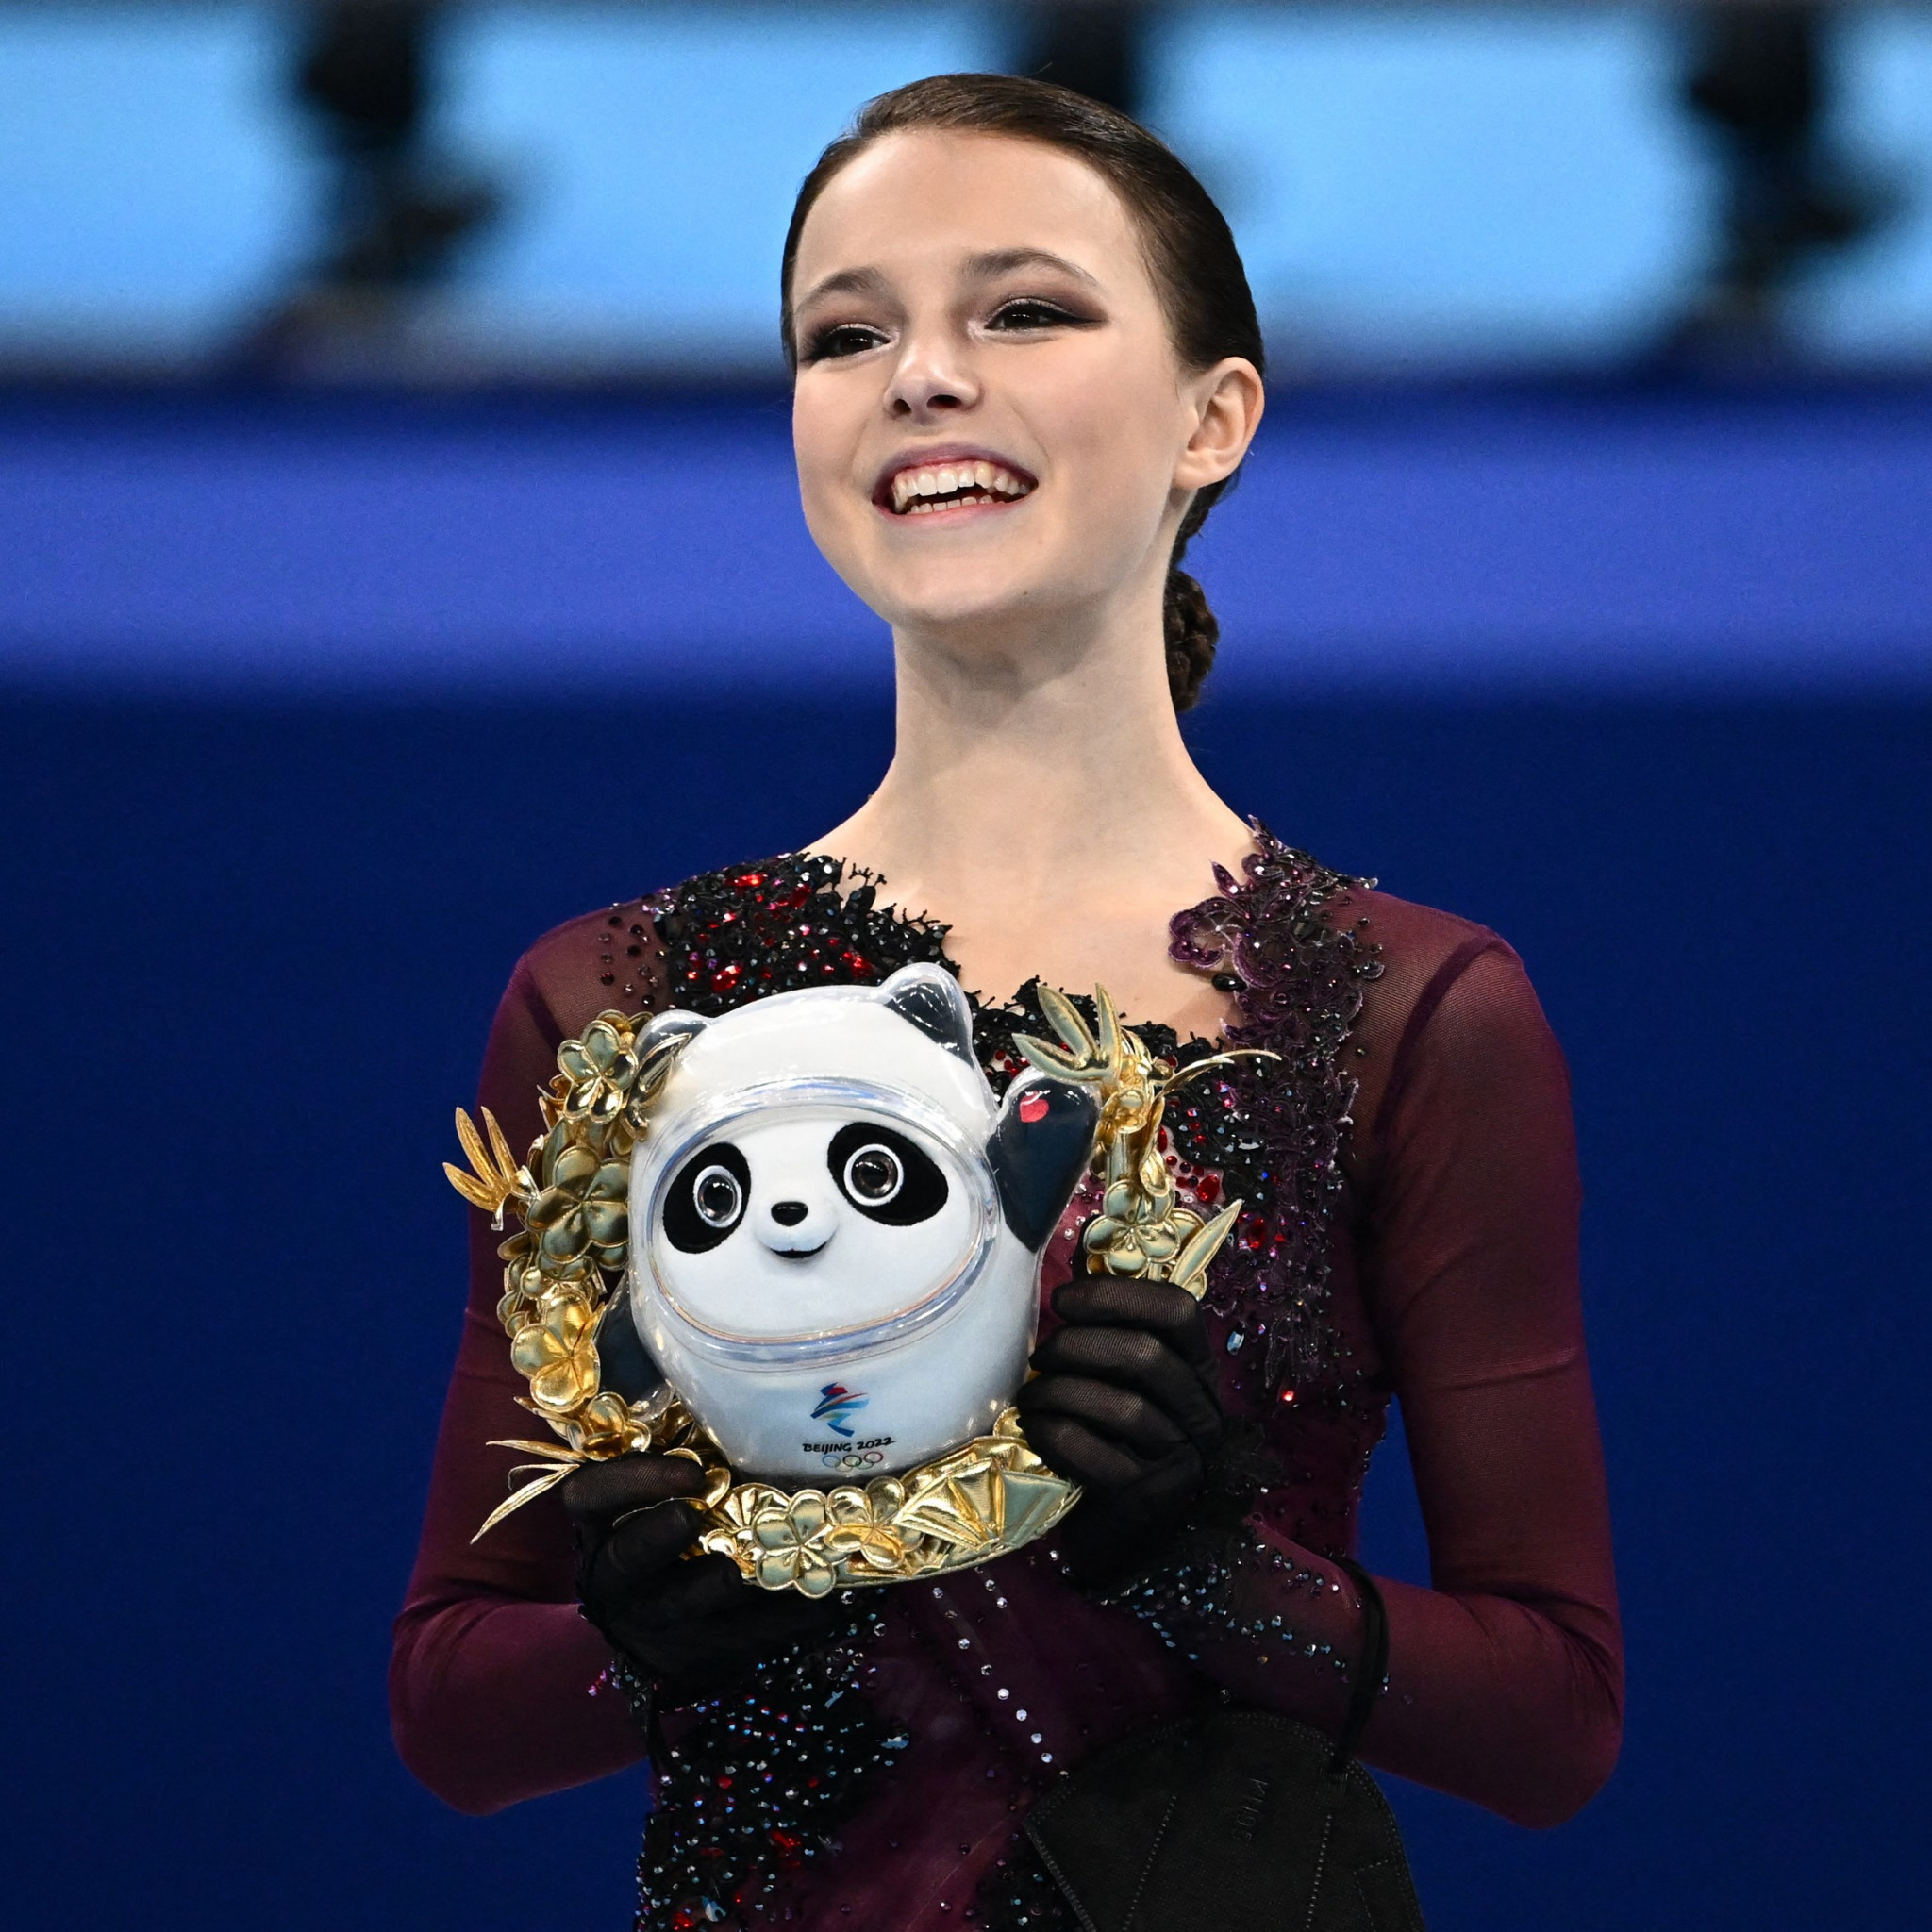 Anna Shcherbakova won gold for the Russian Olympic Committee in the women's singles figure skating event at Beijing 2022 ©Getty Images